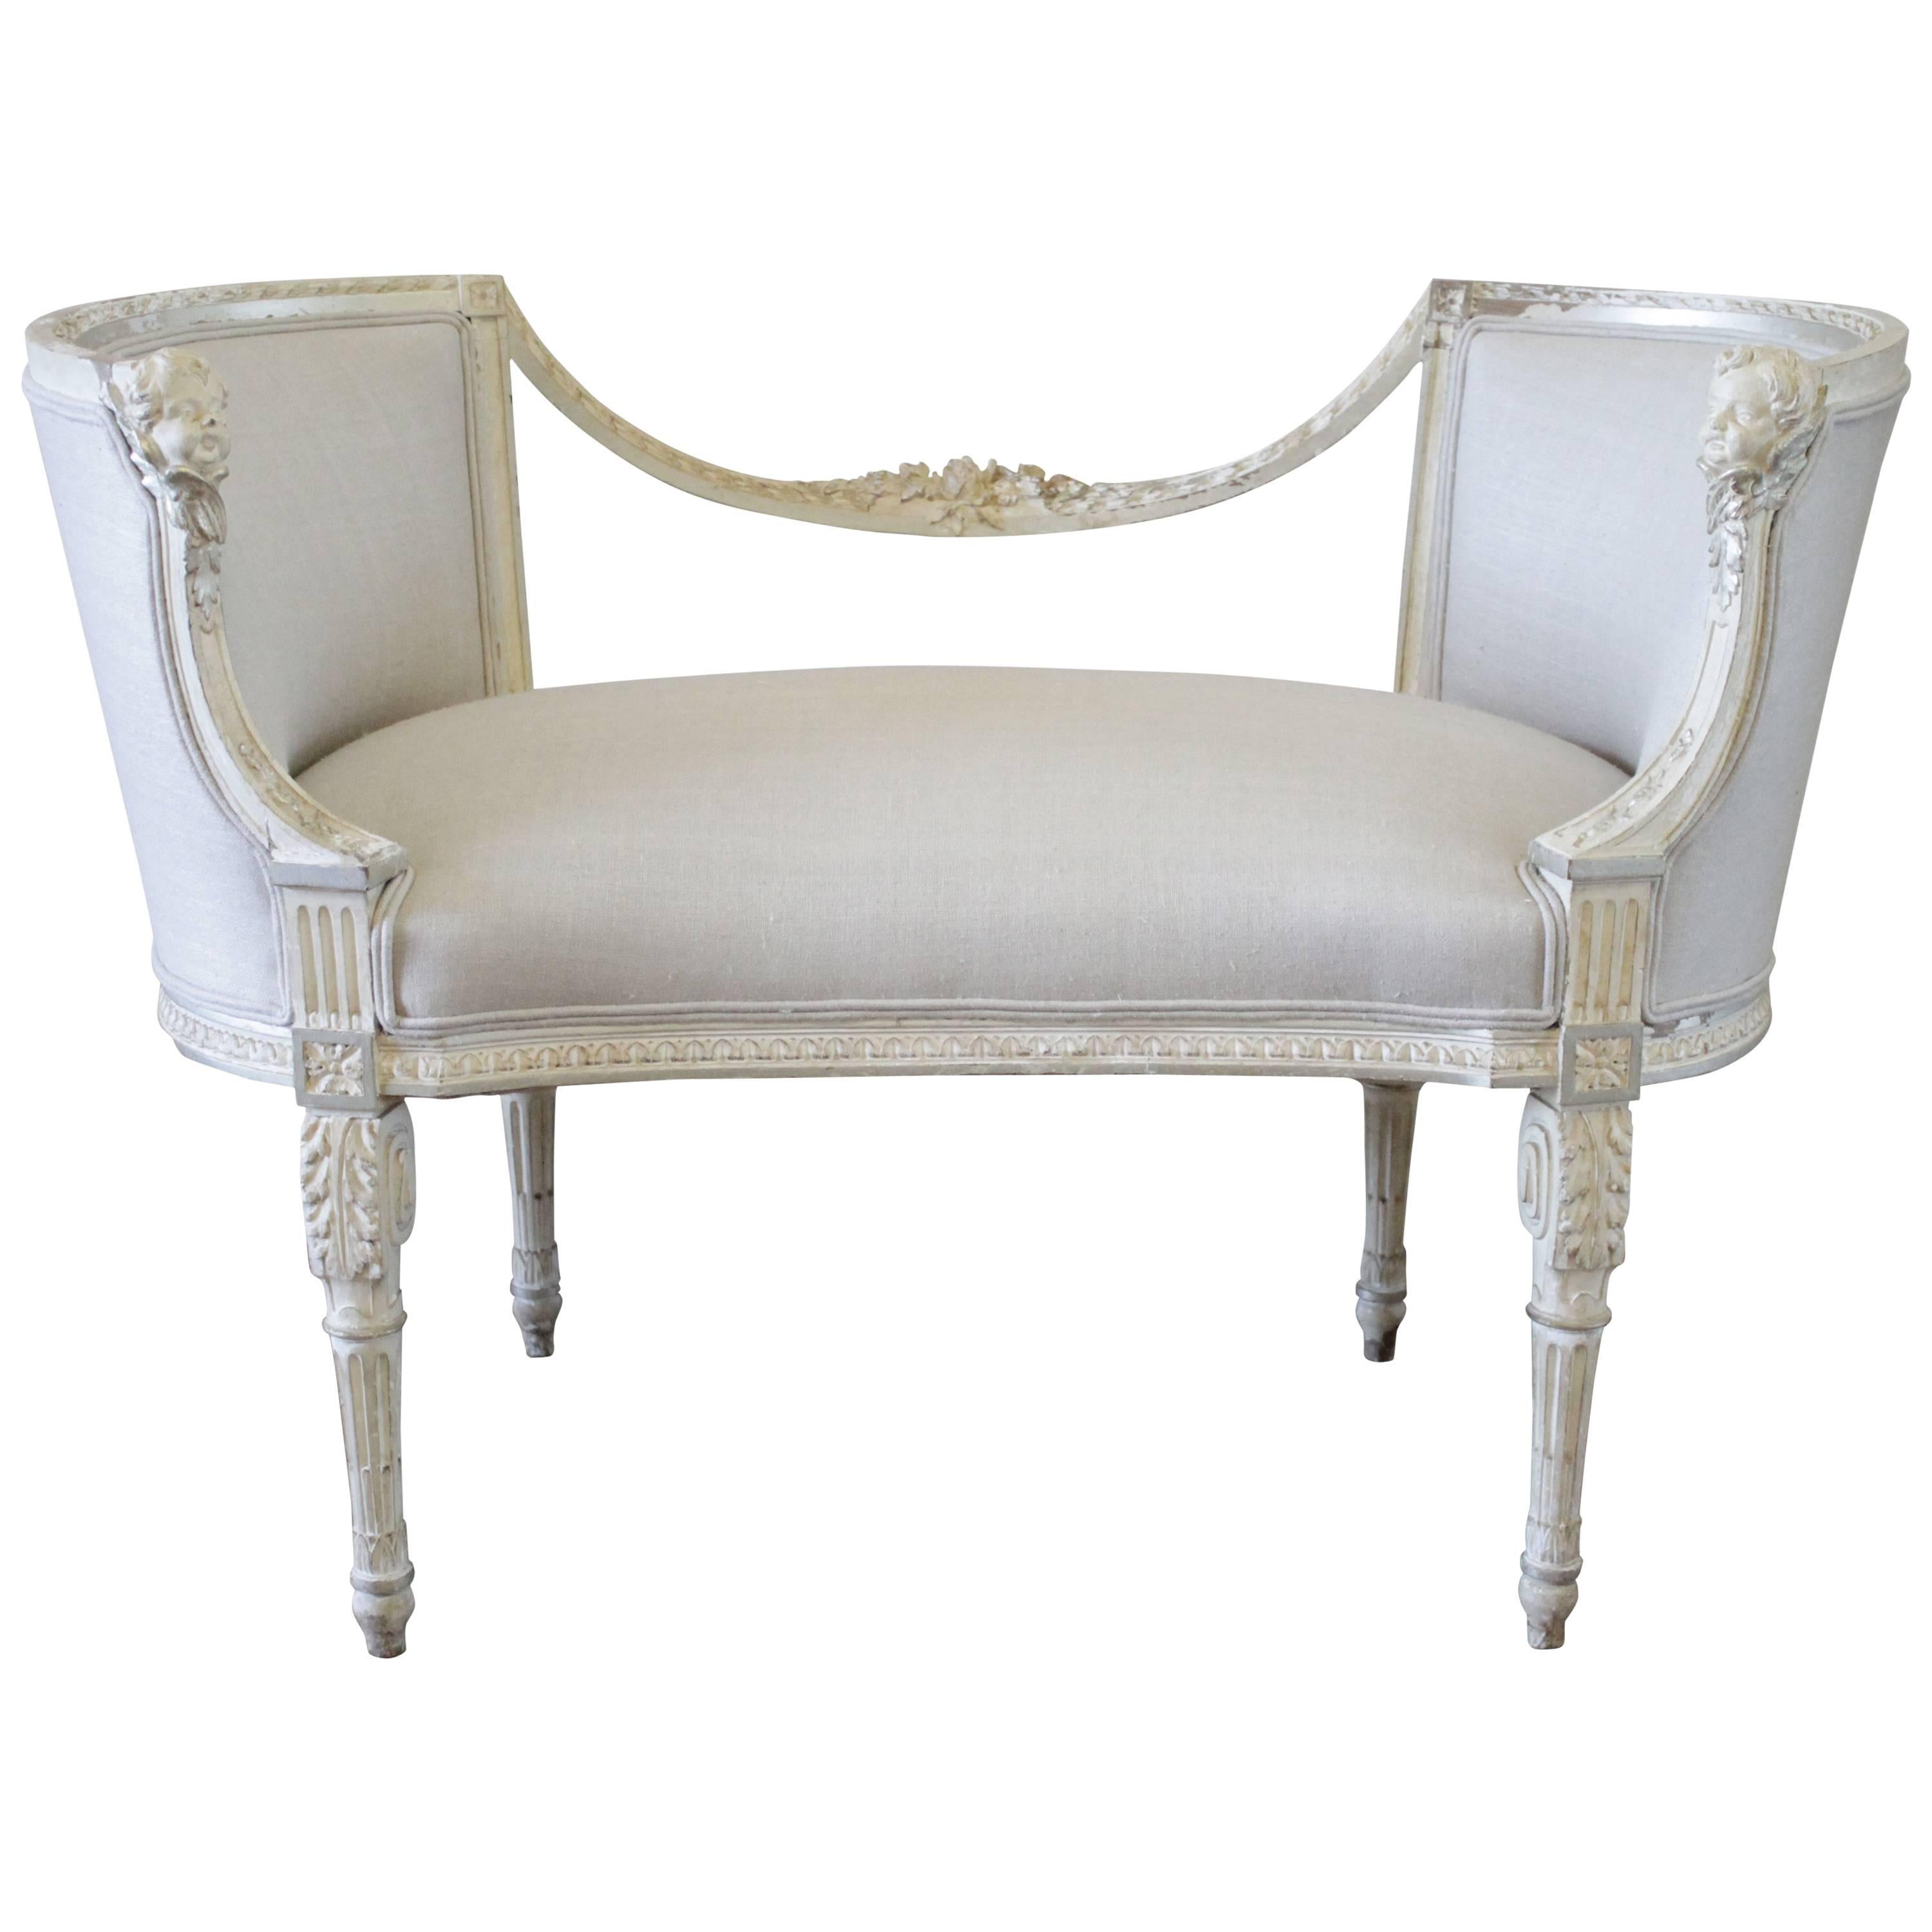 19th Century Antique Neoclassical Style Painted and Silk Upholstered Bench